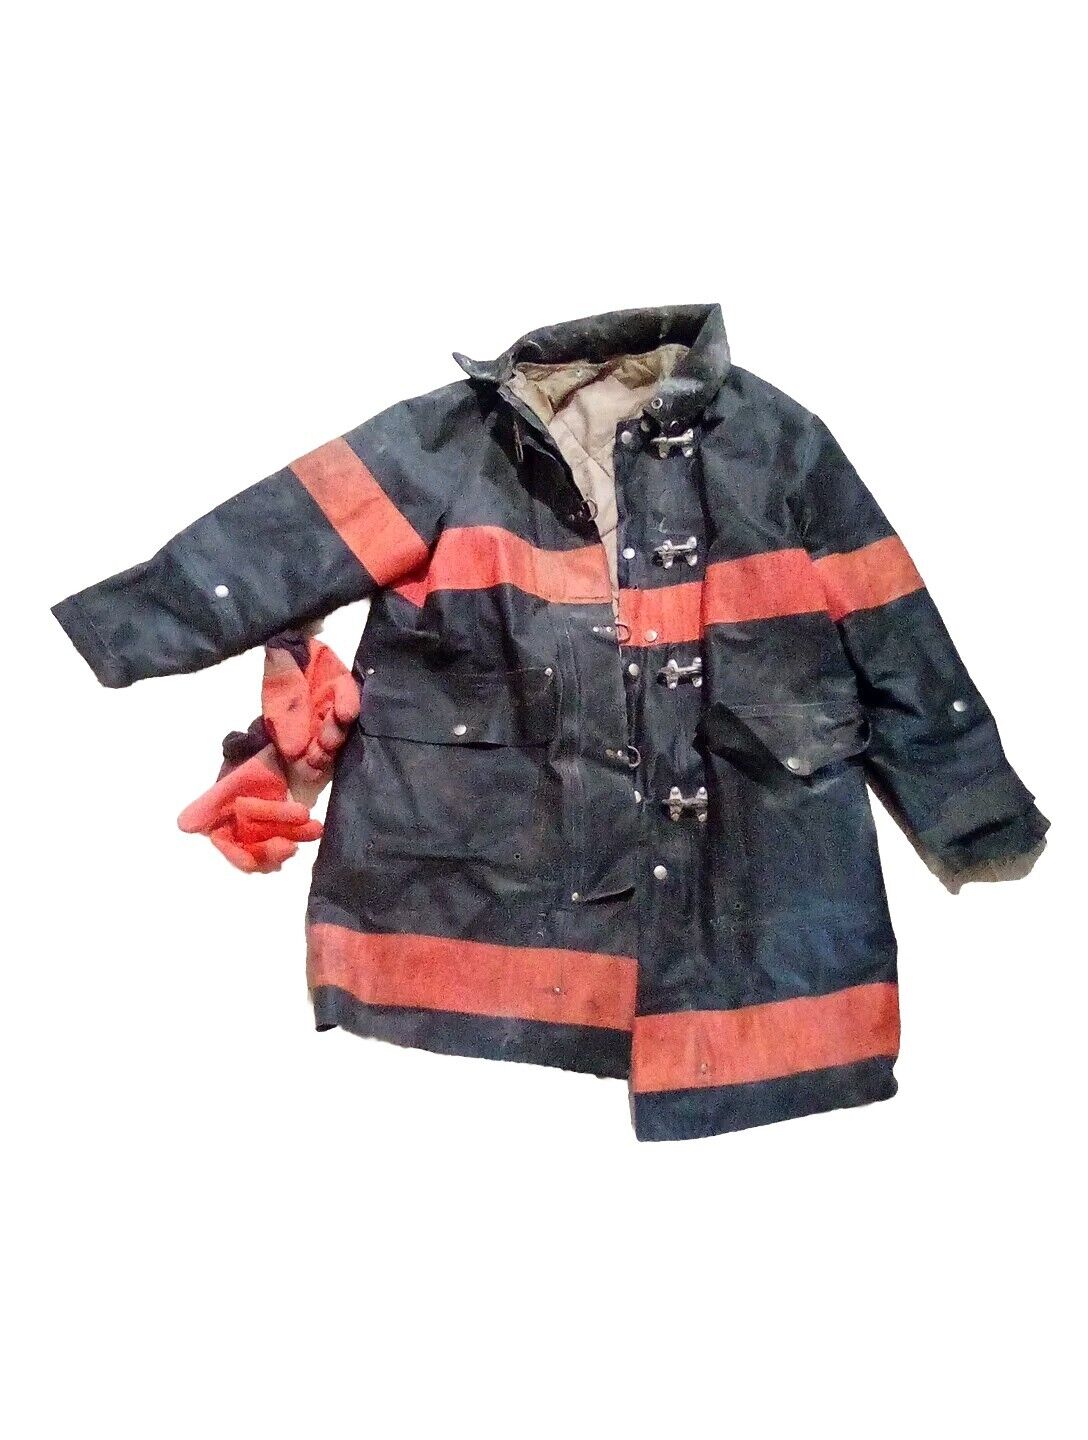 firefighter long turnout coat And Gloves Toggle Button Hooks Insulated 